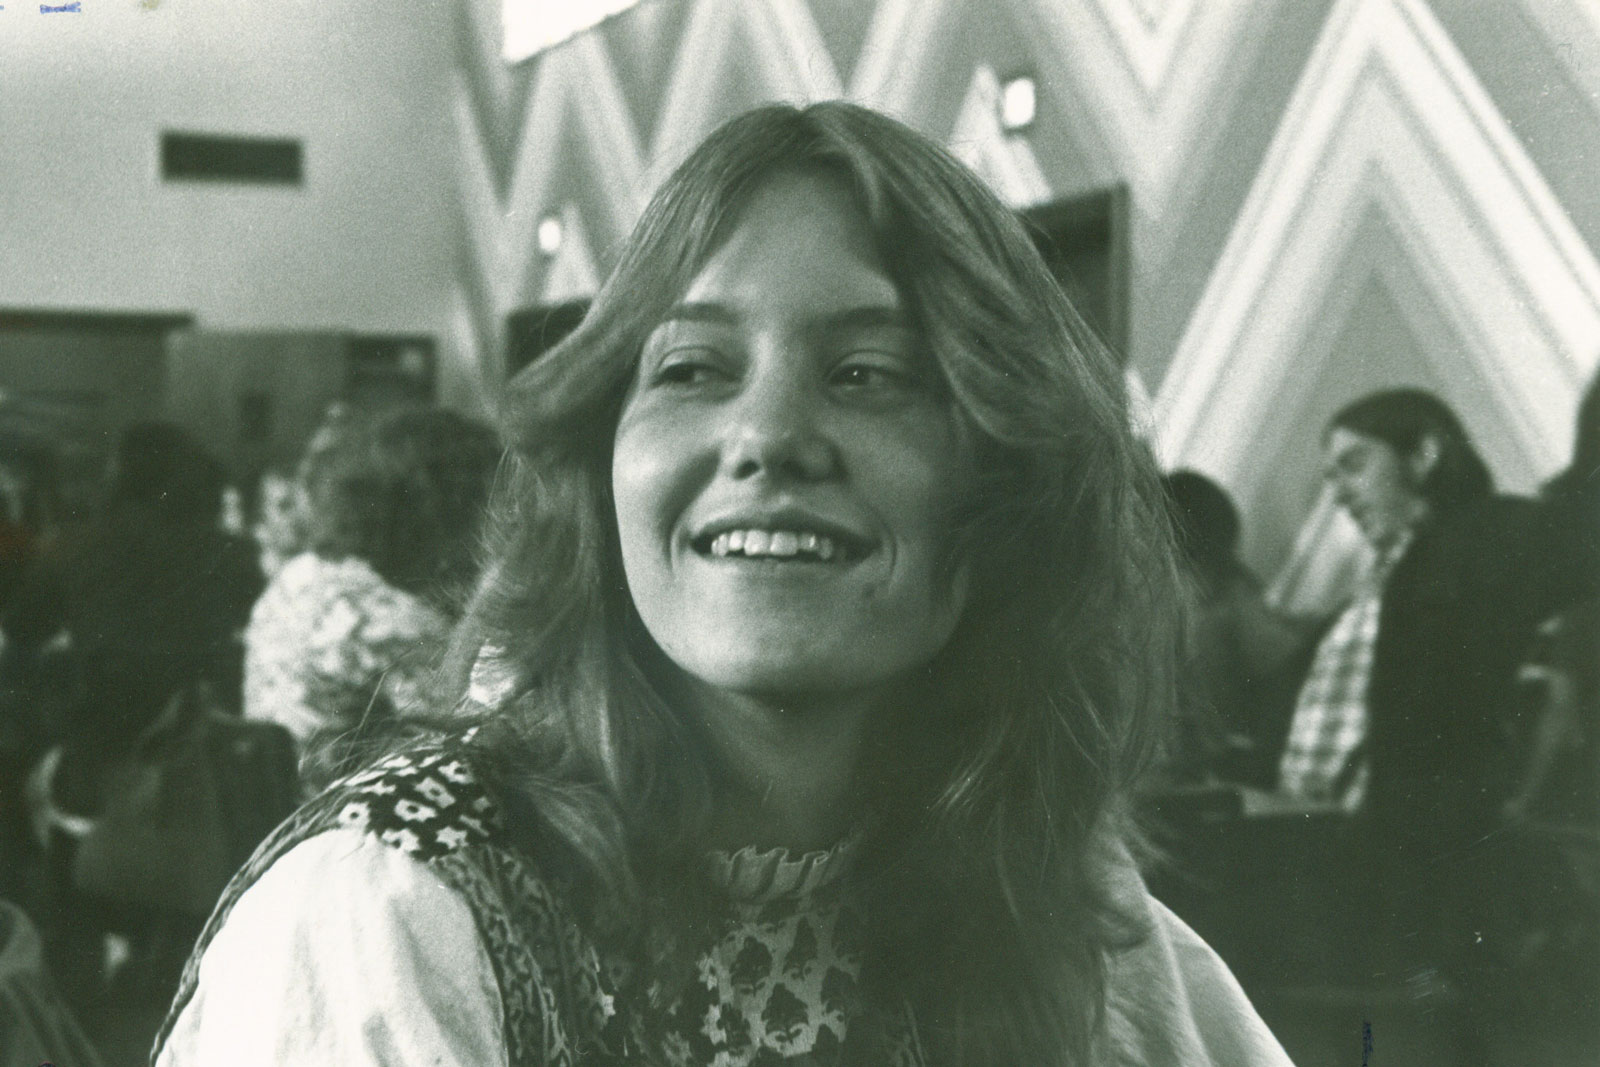 Photo of Jenni Heisler. David Ford, Colorado College yearbook photographs, spring 1972, PP 19-90, Colorado College Special Collections. Gift of David Ford, CC class of 1972.